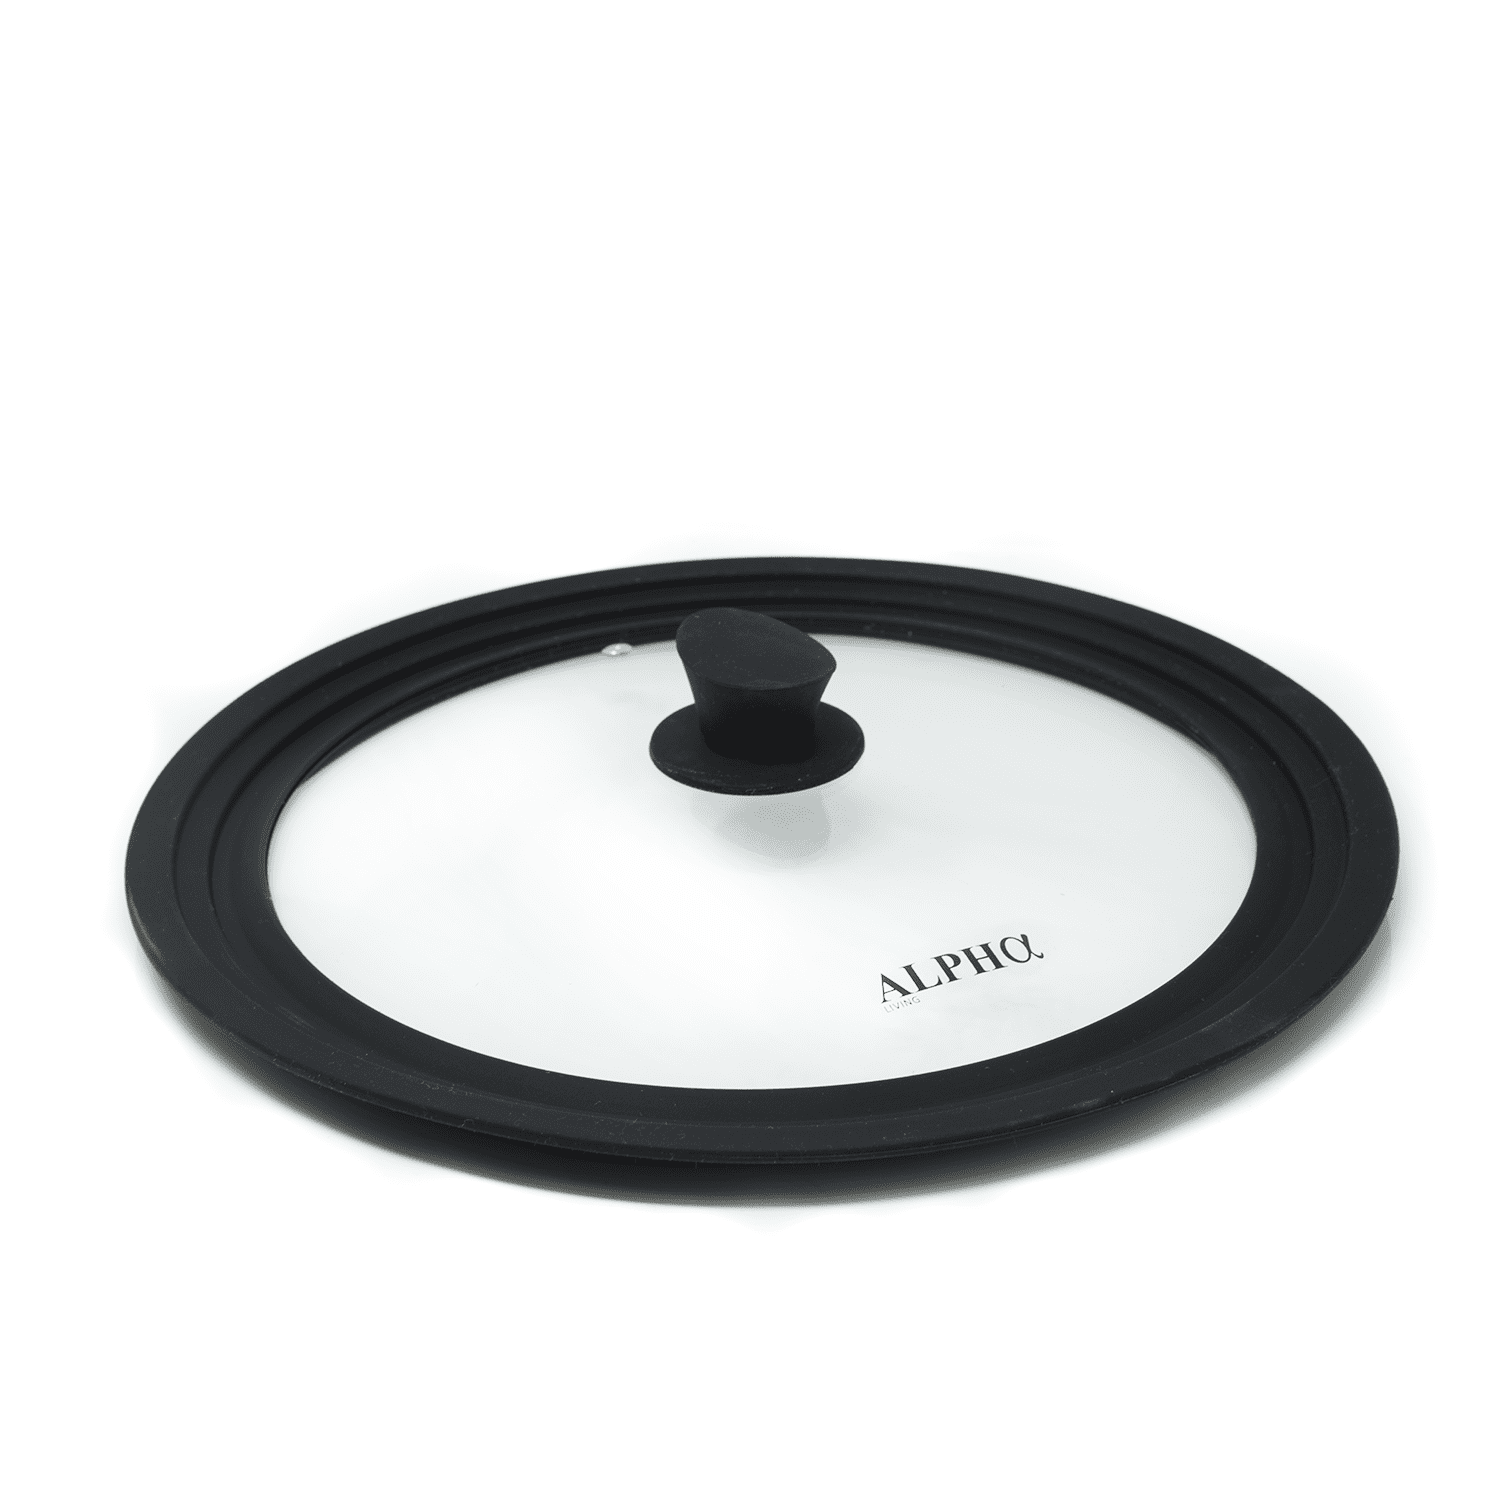 Universal Lid for Pans, Pots and Skillets Vented Tempered Glass with Graduated Rim Fits 11 inch, 12 inch, 12.5 inch Cookware Heat Resistant Handle